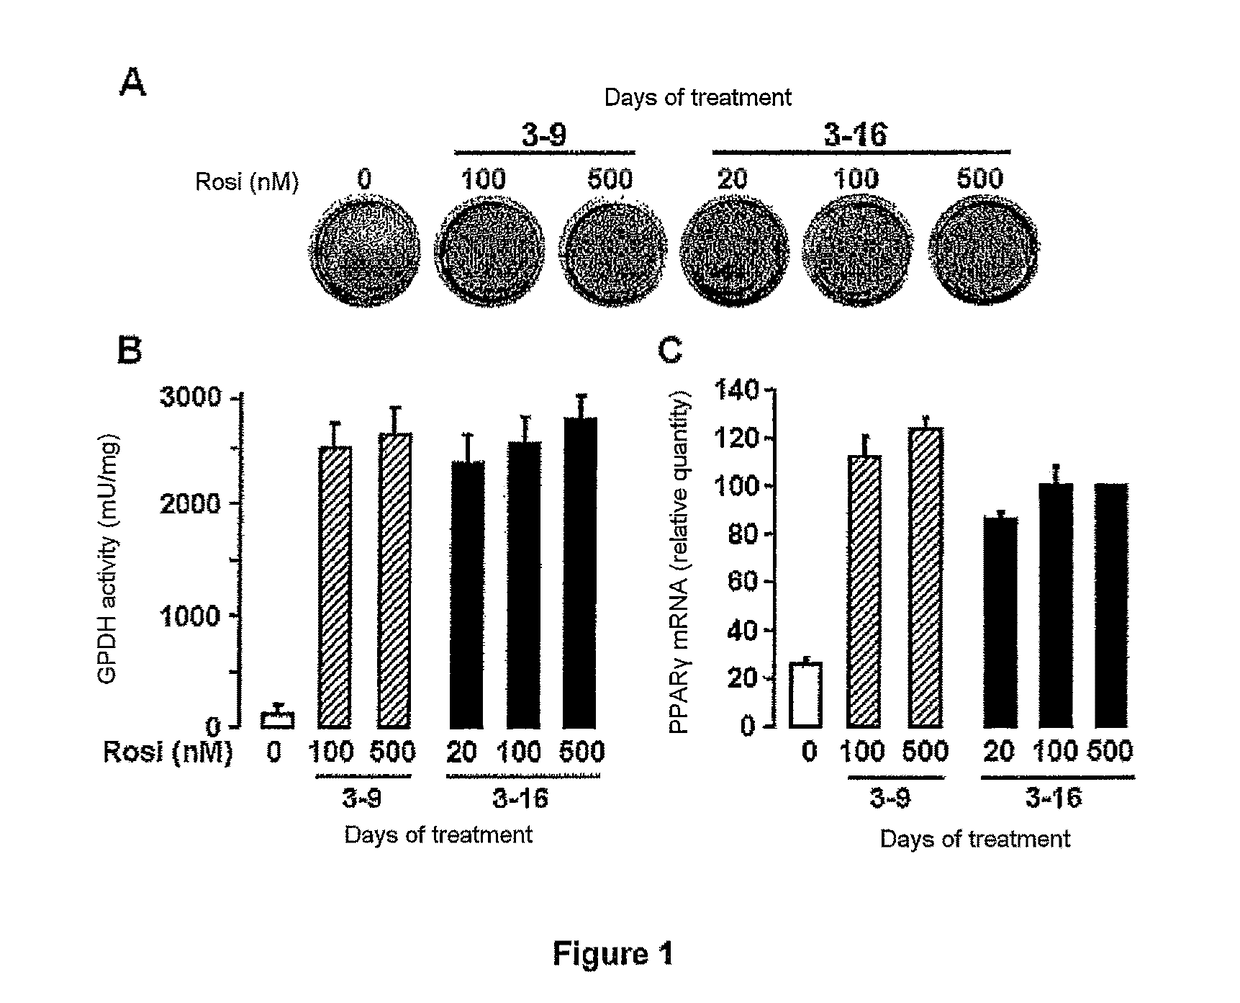 Established human brown adipocyte line and method for differentiation from an hMADS cell line